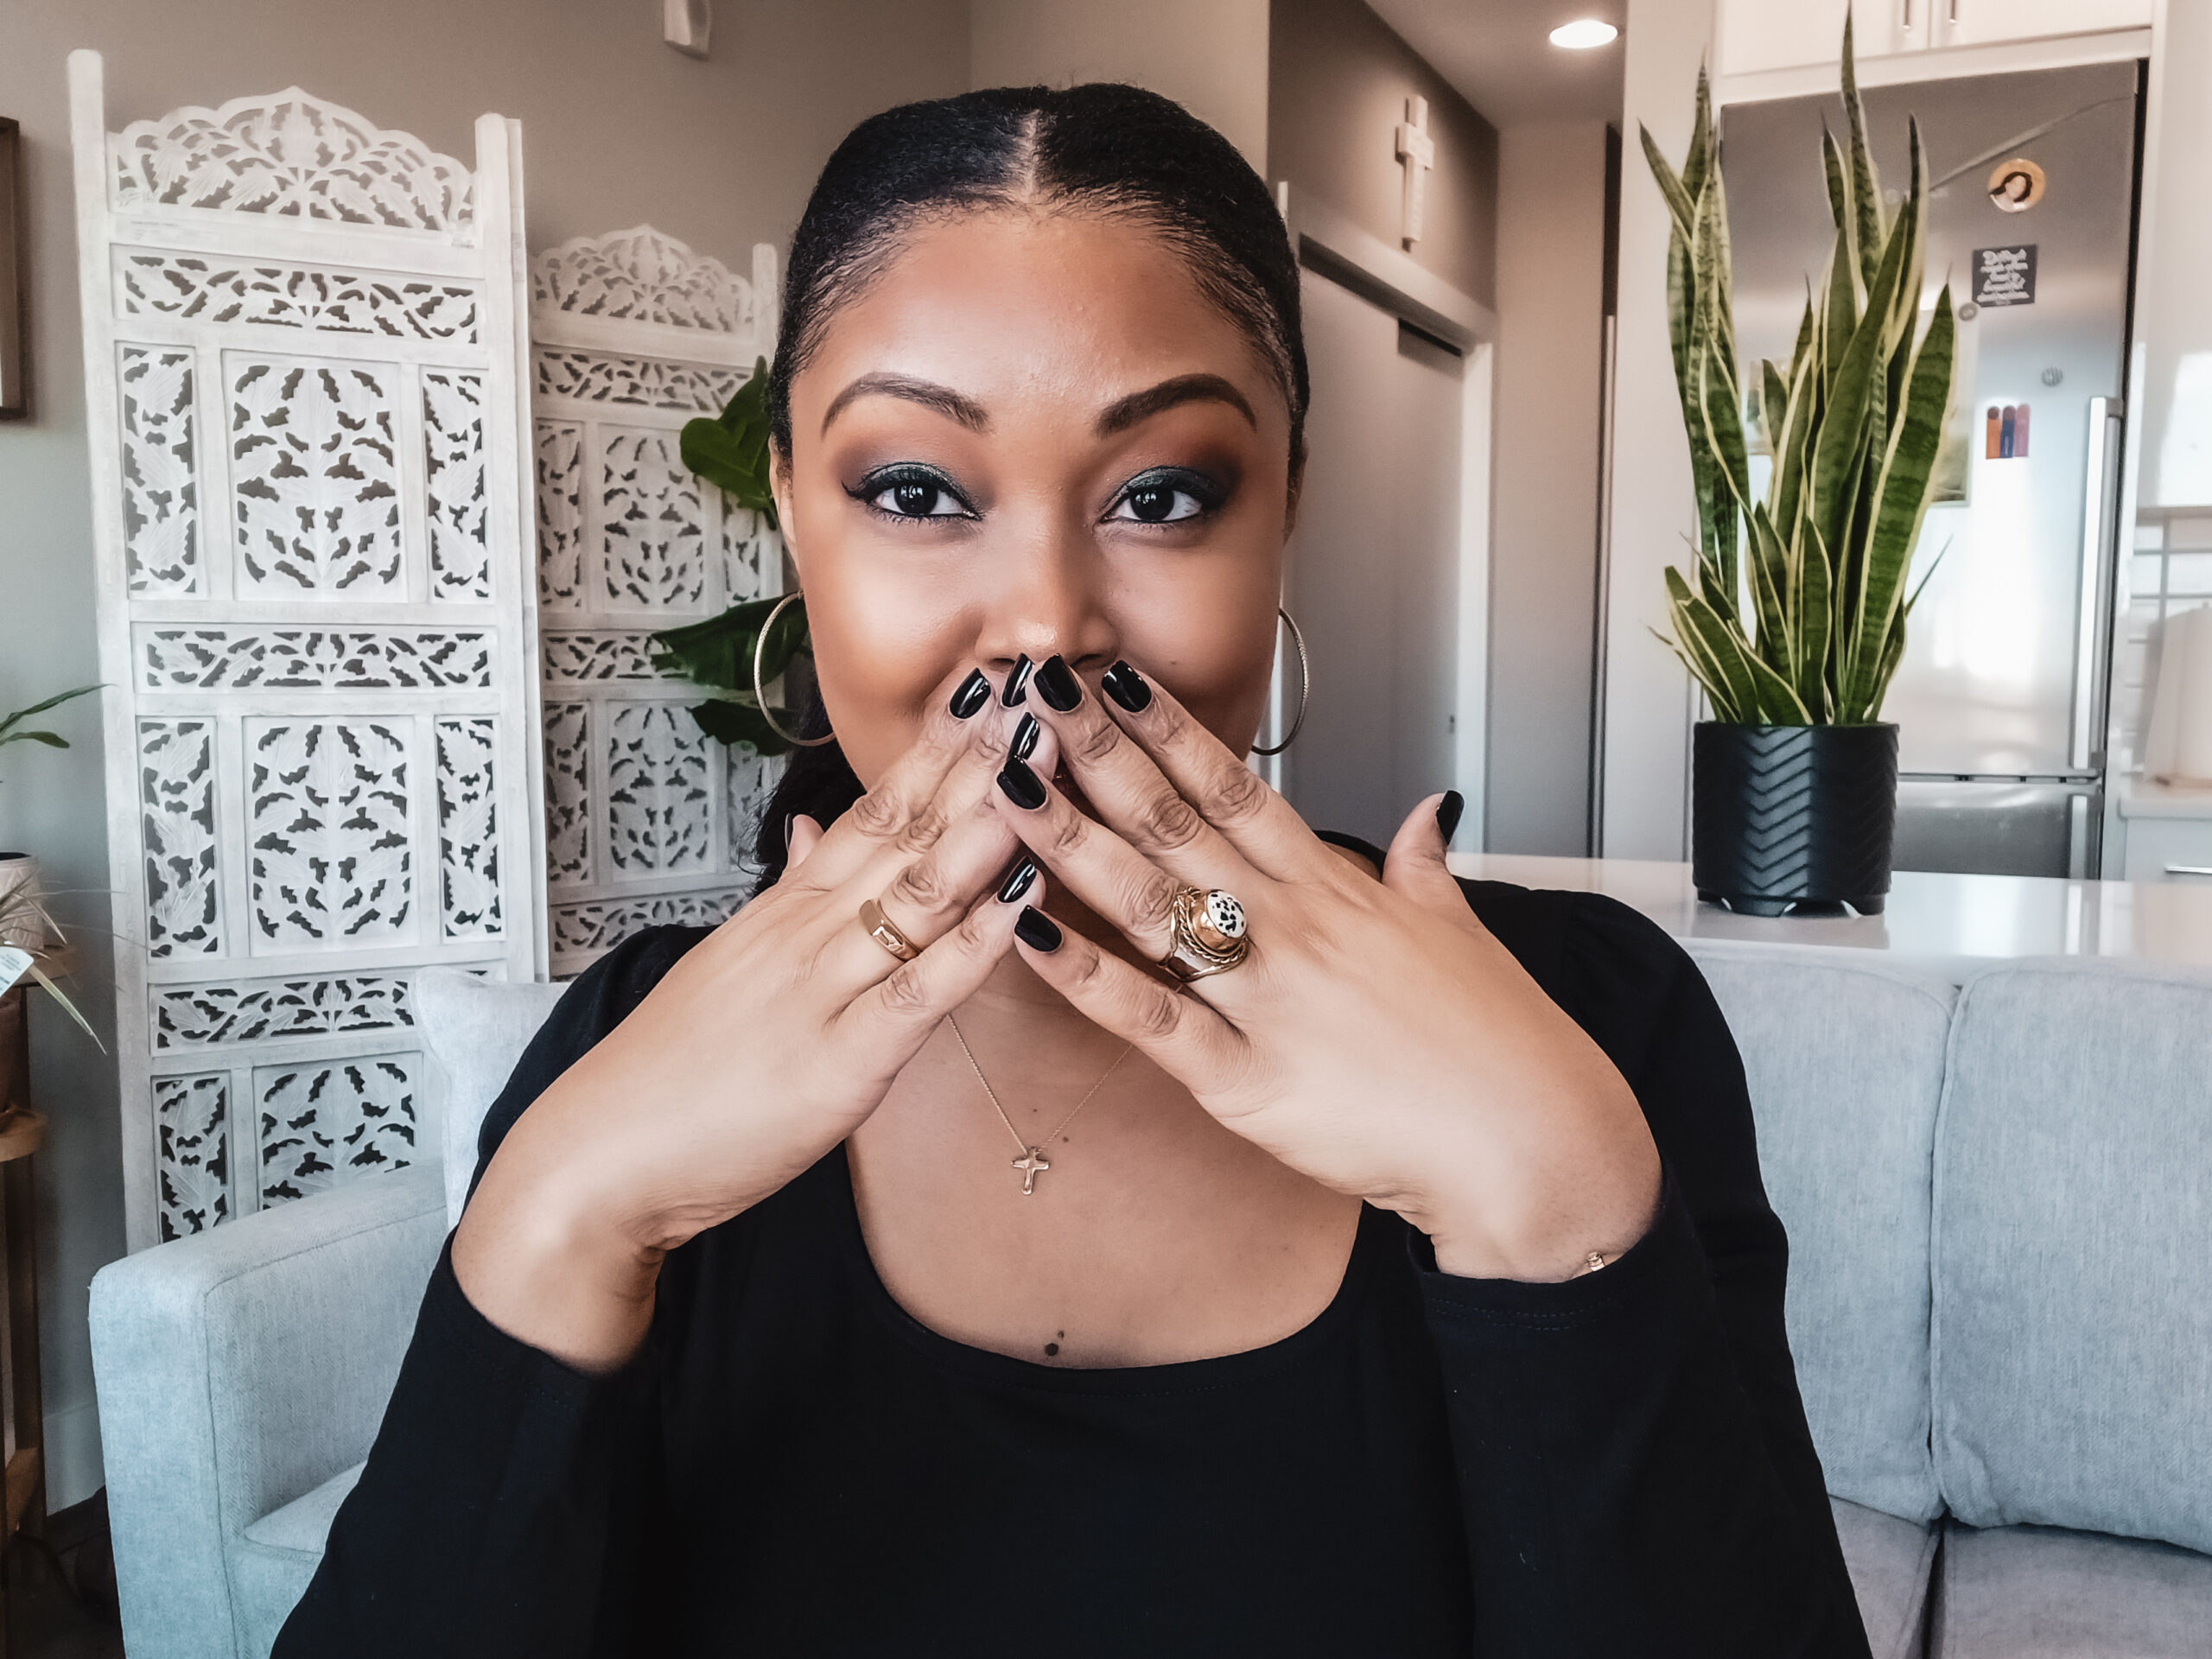 This Bahamian Gyal blogger Rogan covers her mouth in excitement as she shares 8 simple things she did that changed her life entirely